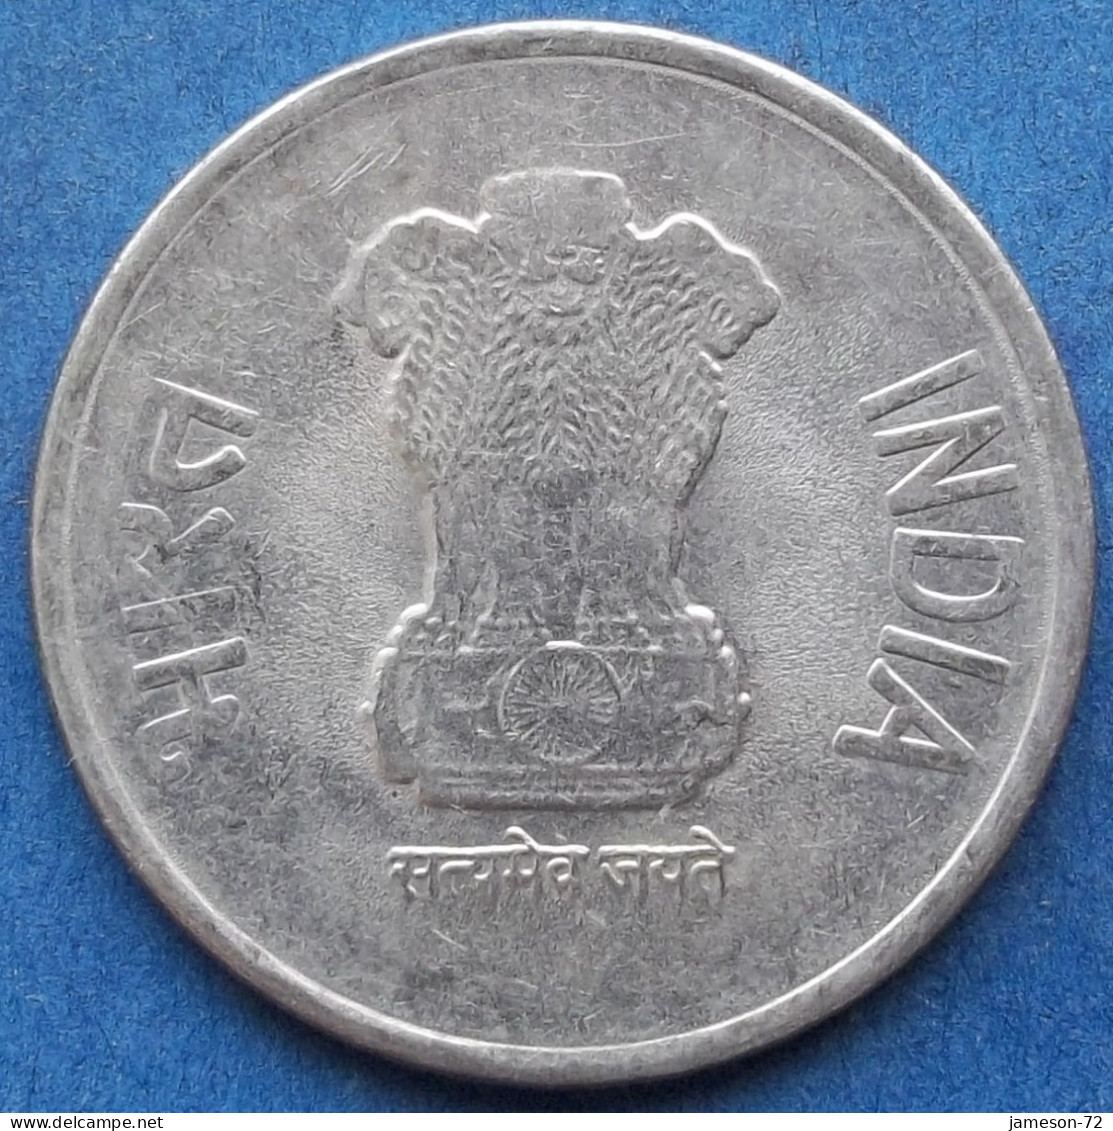 INDIA - 2 Rupees 2019 "Lotus Flowers" KM# 395 Republic Decimal Coinage (1957) - Edelweiss Coins - Georgia